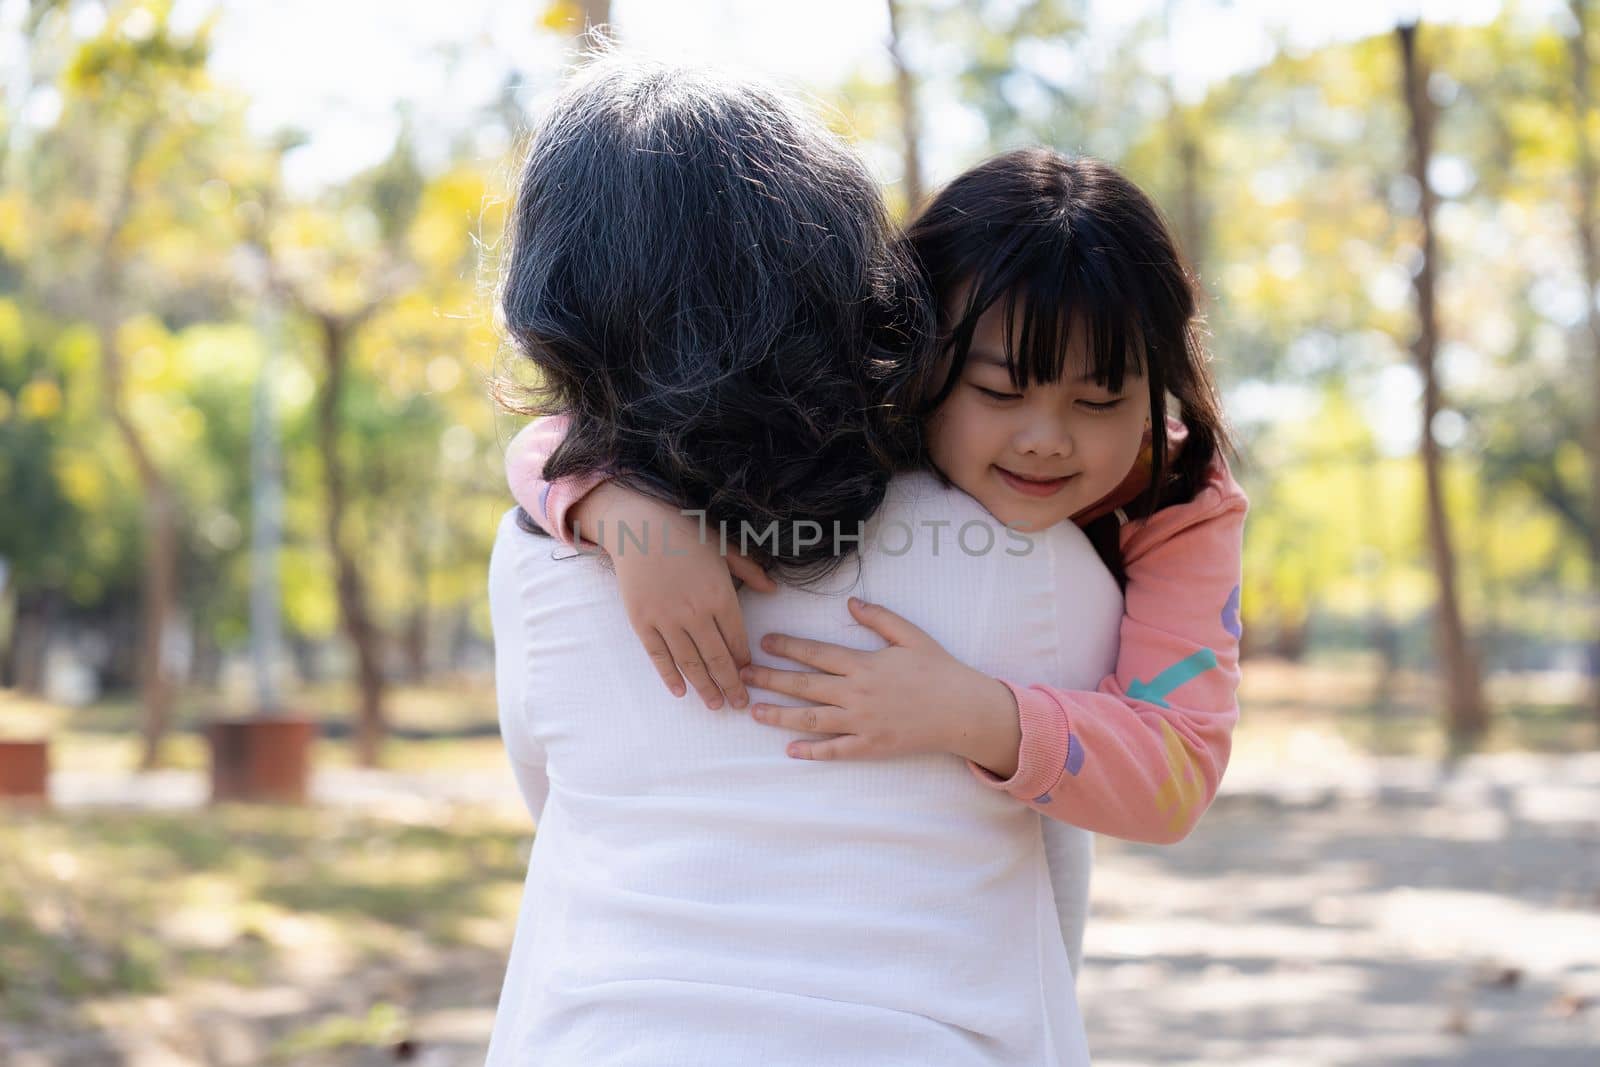 An cute ,granddaughter giving hug, cuddling to her grandmother, having great time in the park together.